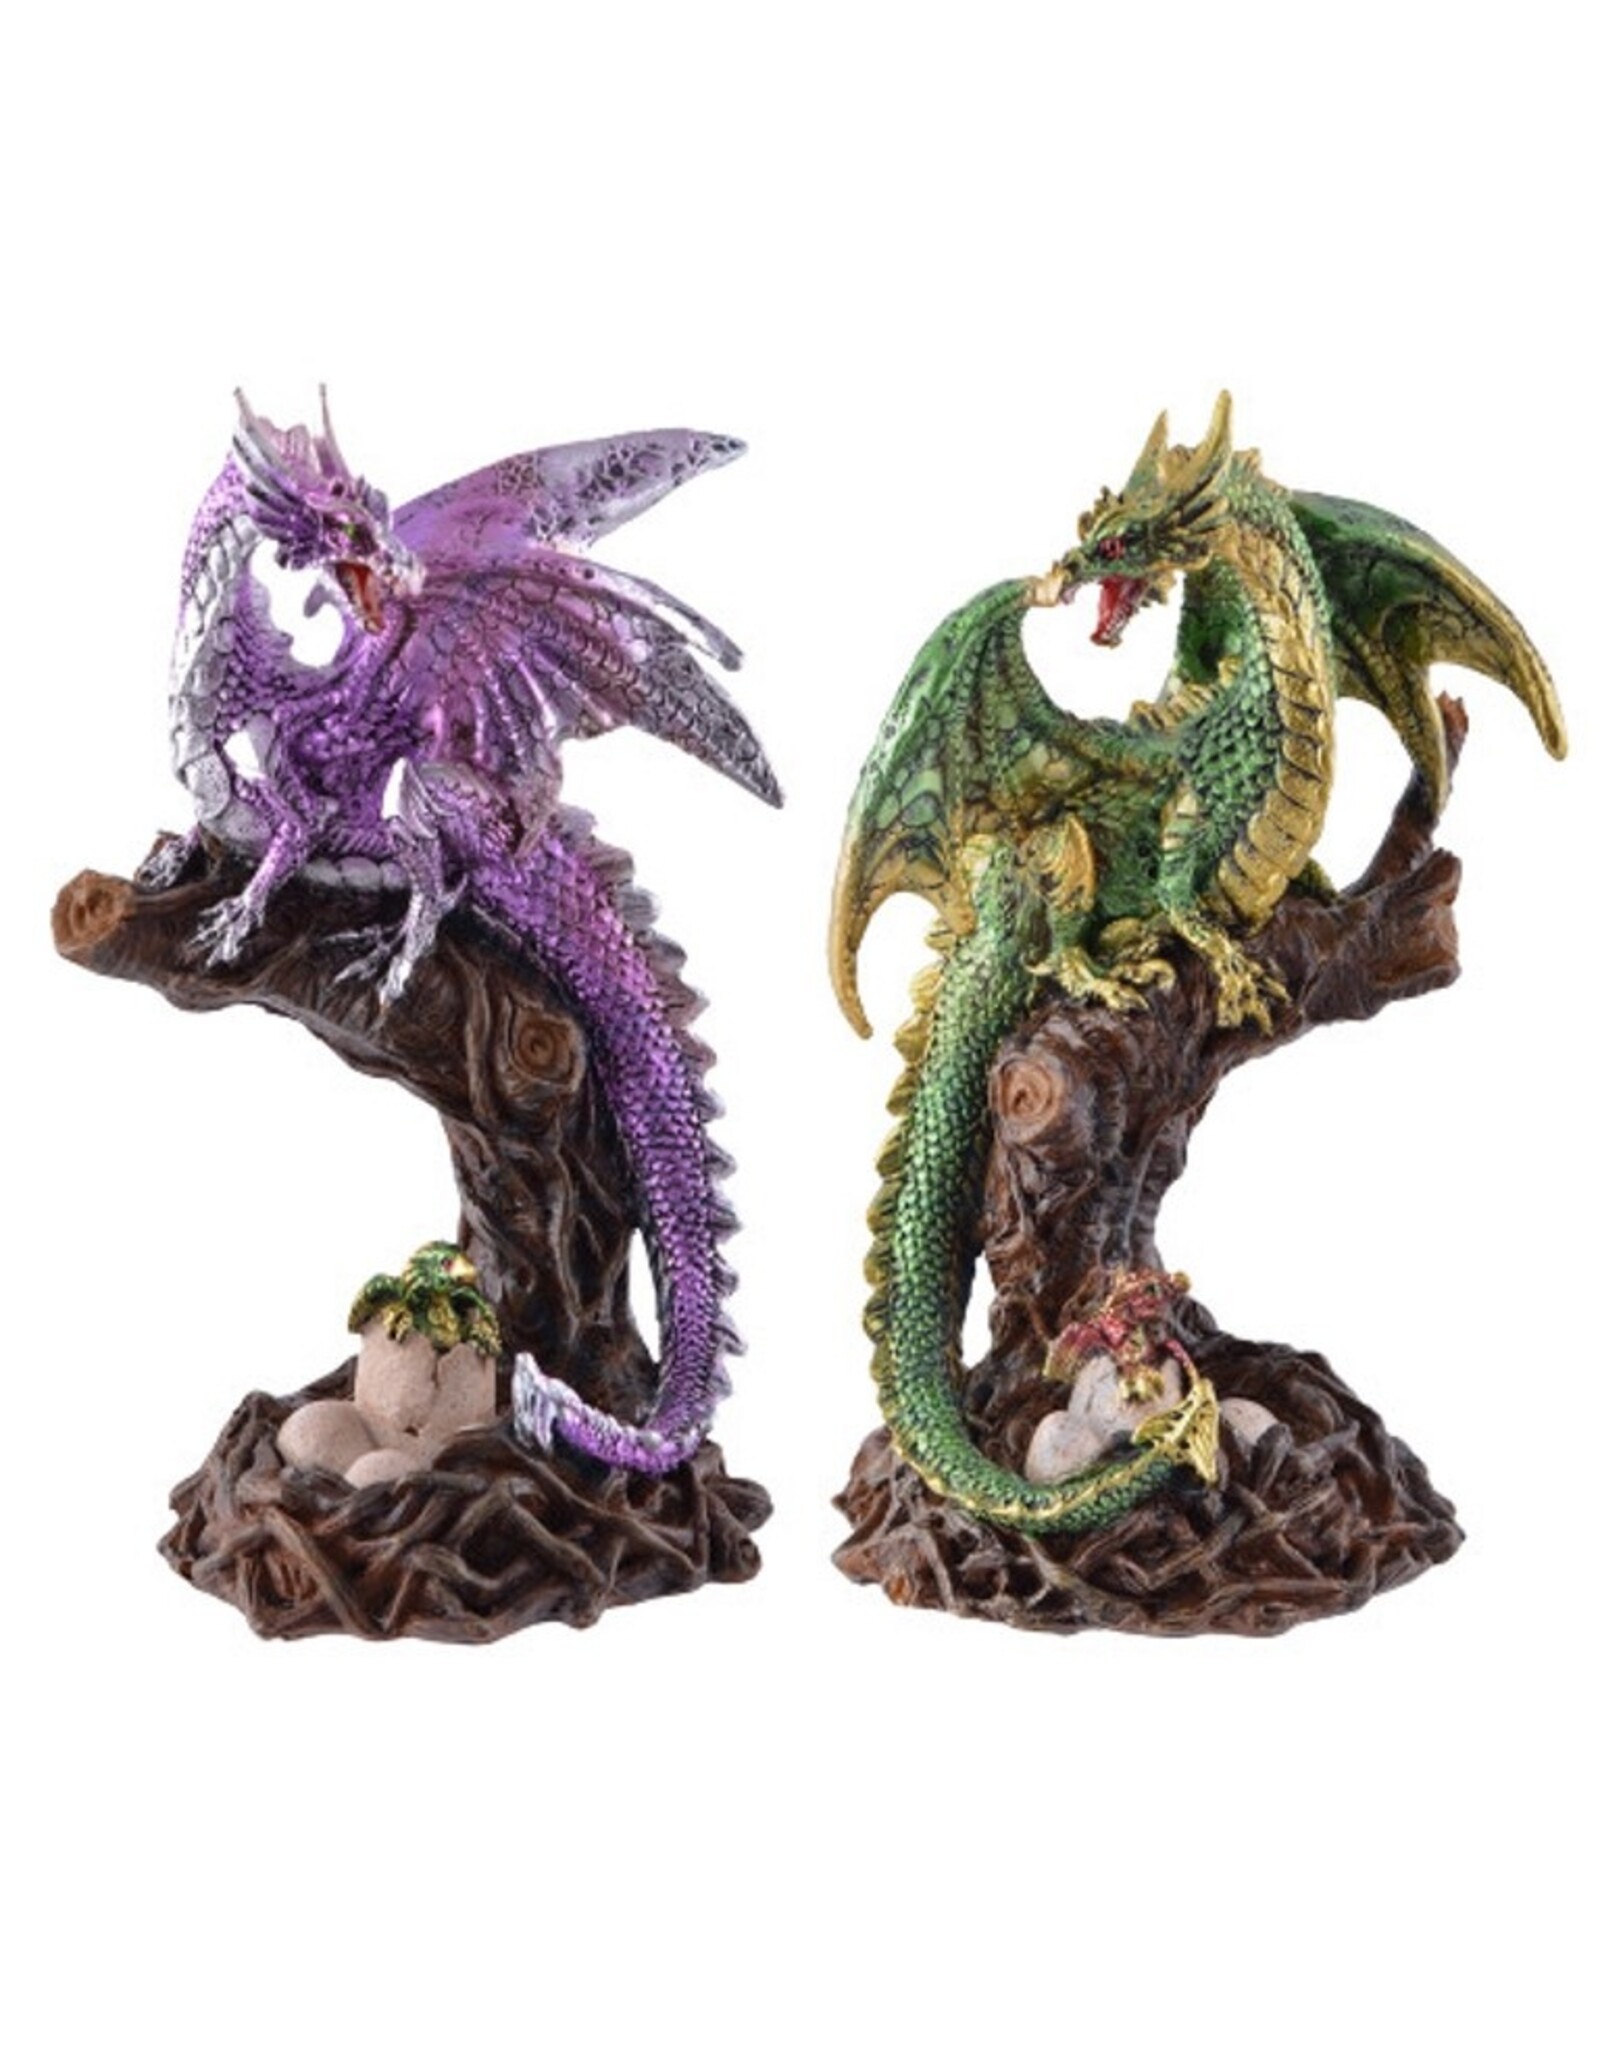 VG Giftware & Lifestyle - Dragon sitting on tree with baby dragon - set of 2 green/purple